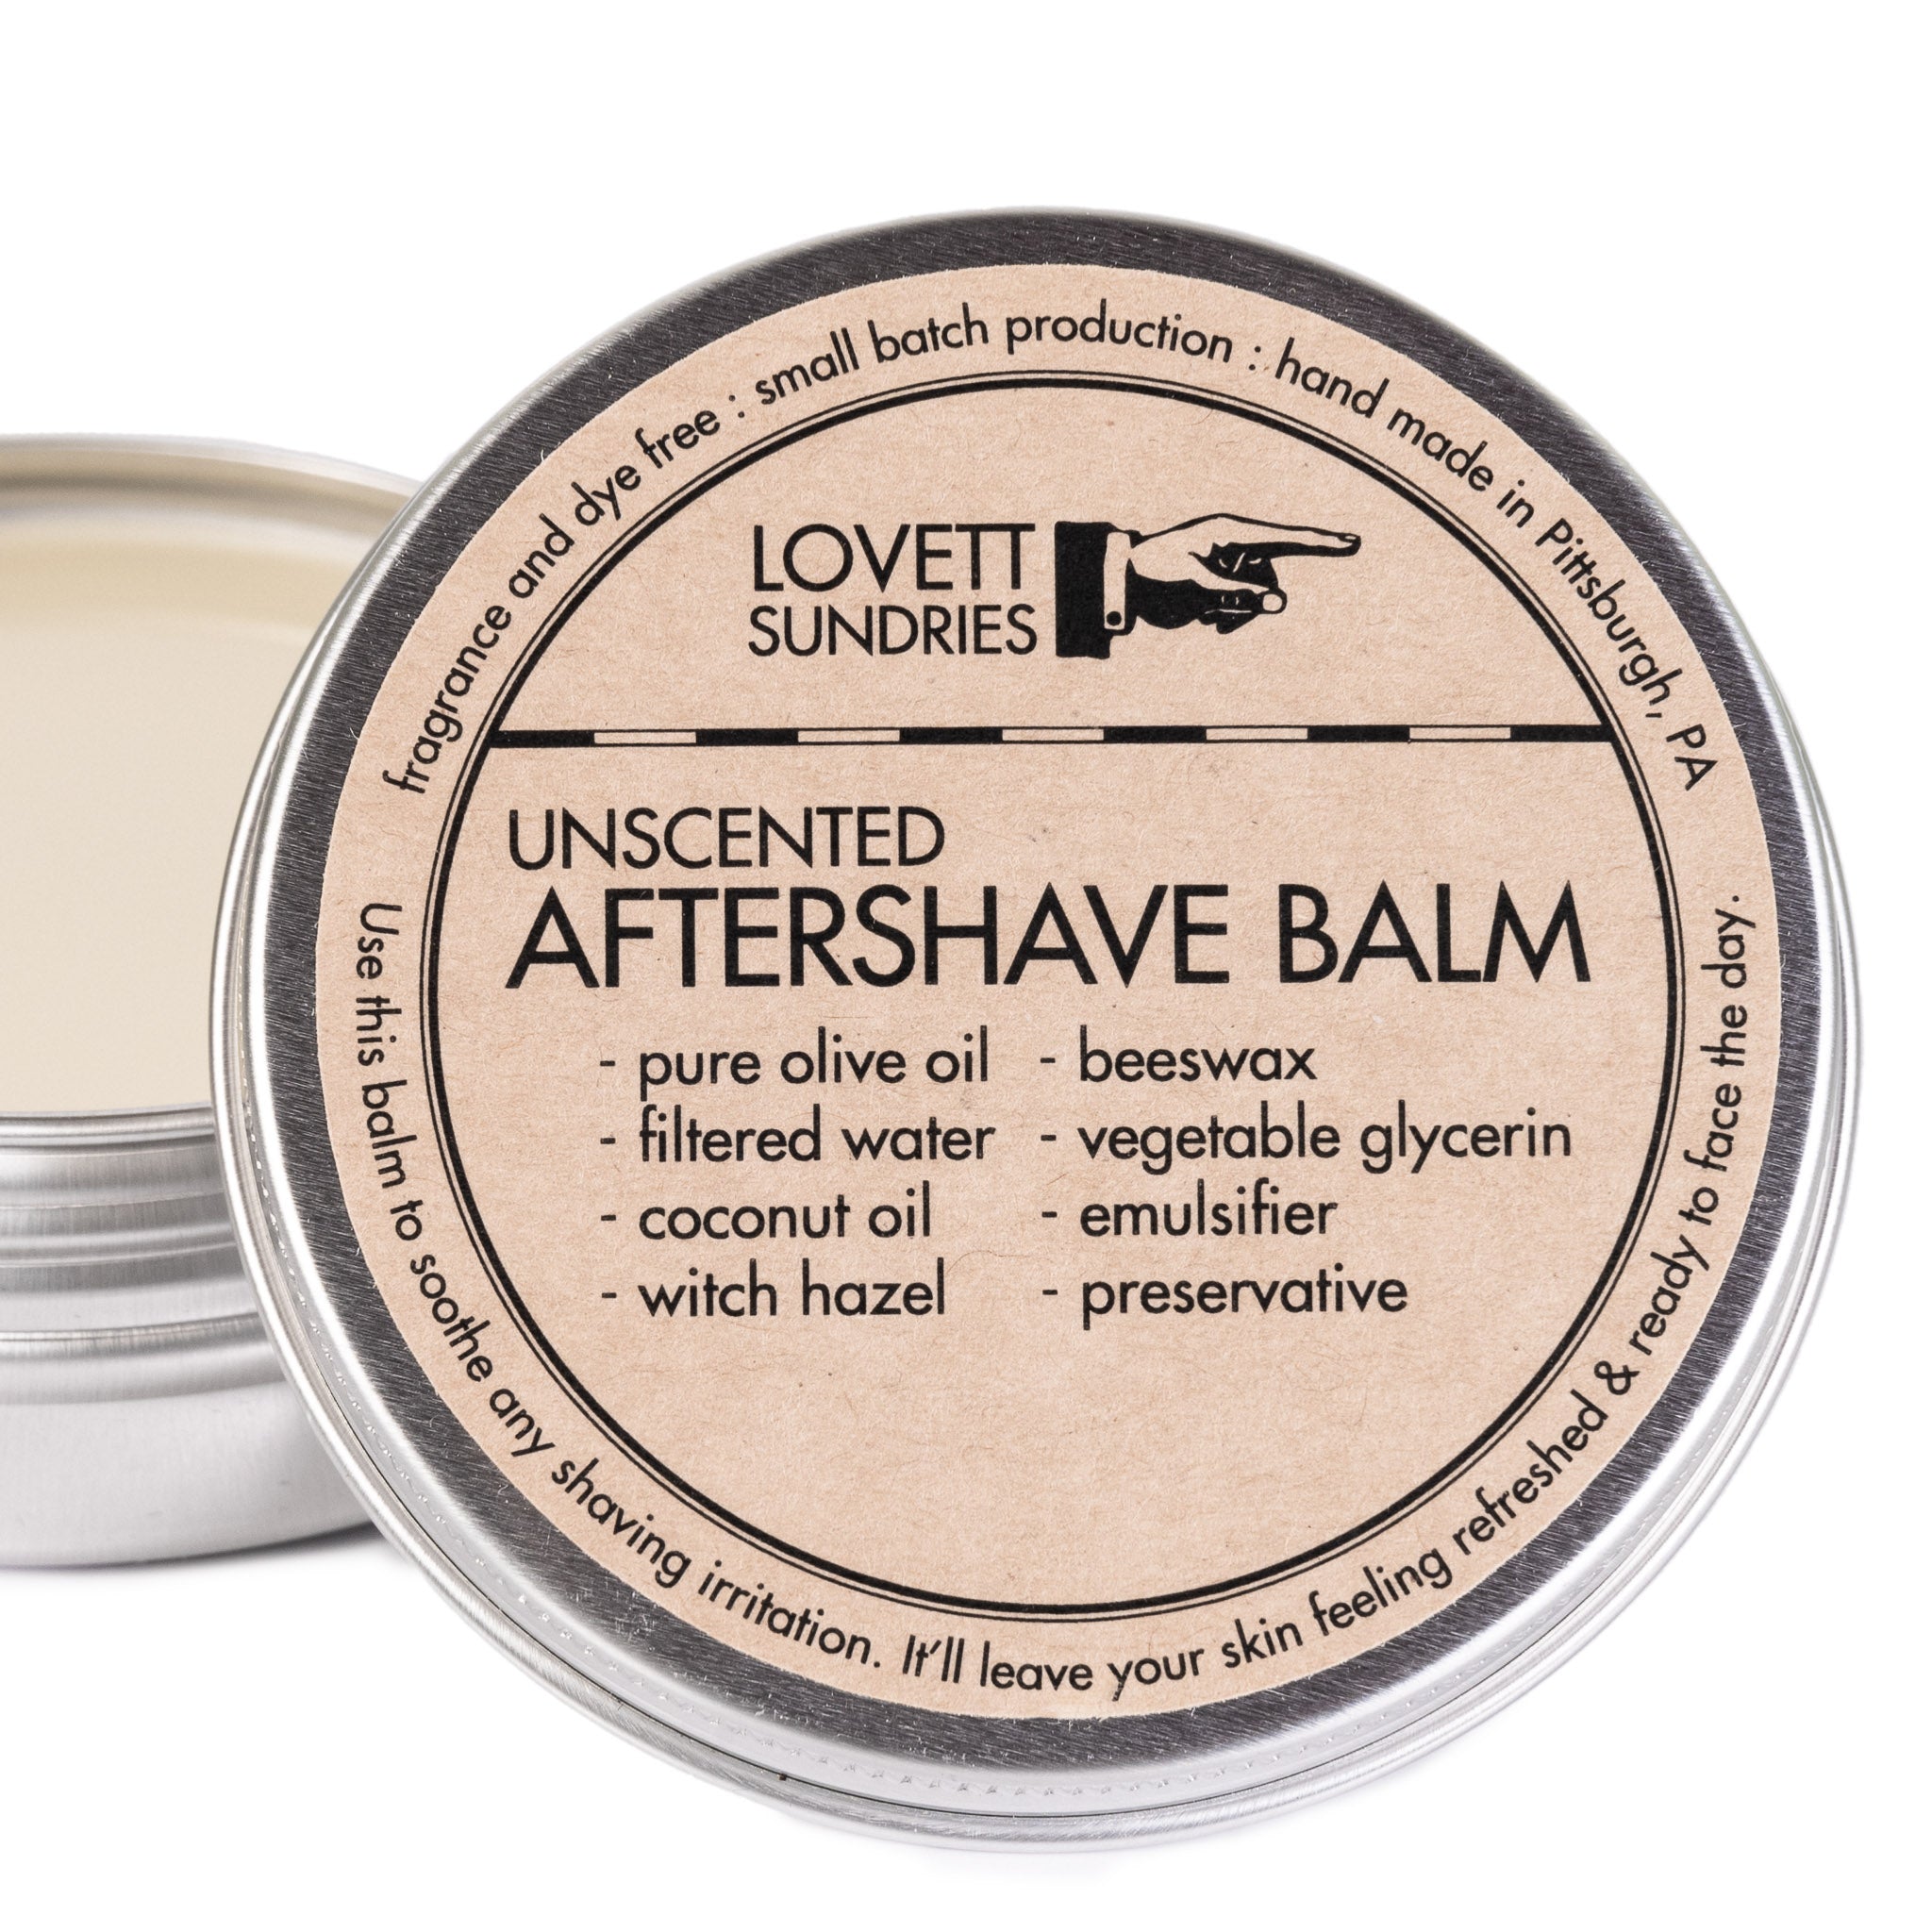 A tin of unscented natural aftershave balm